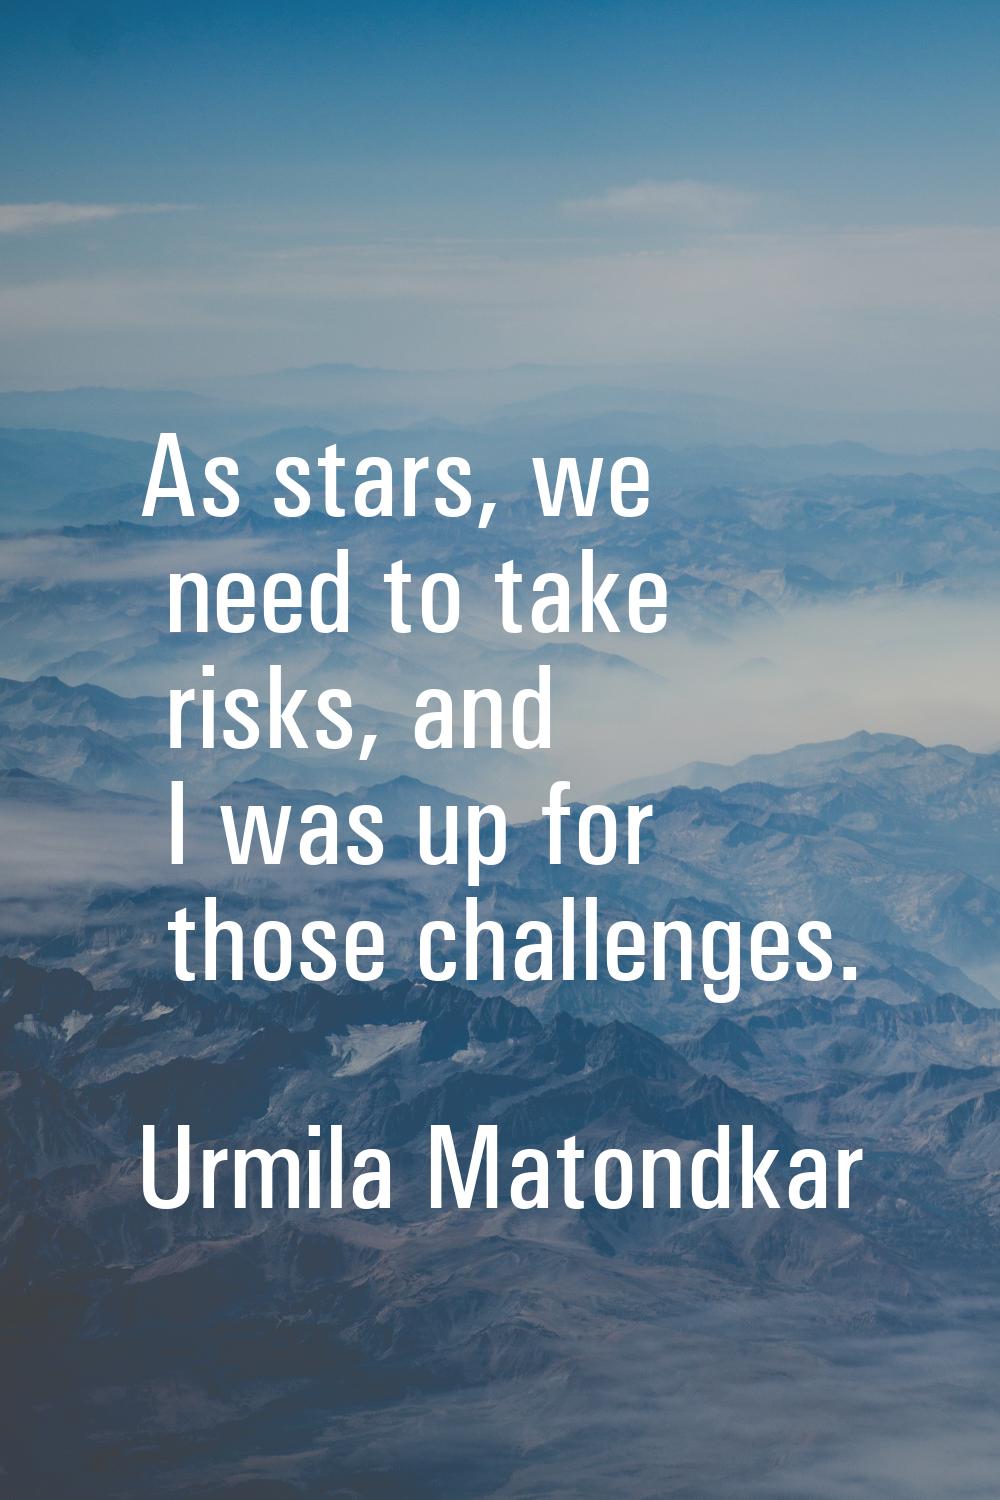 As stars, we need to take risks, and I was up for those challenges.